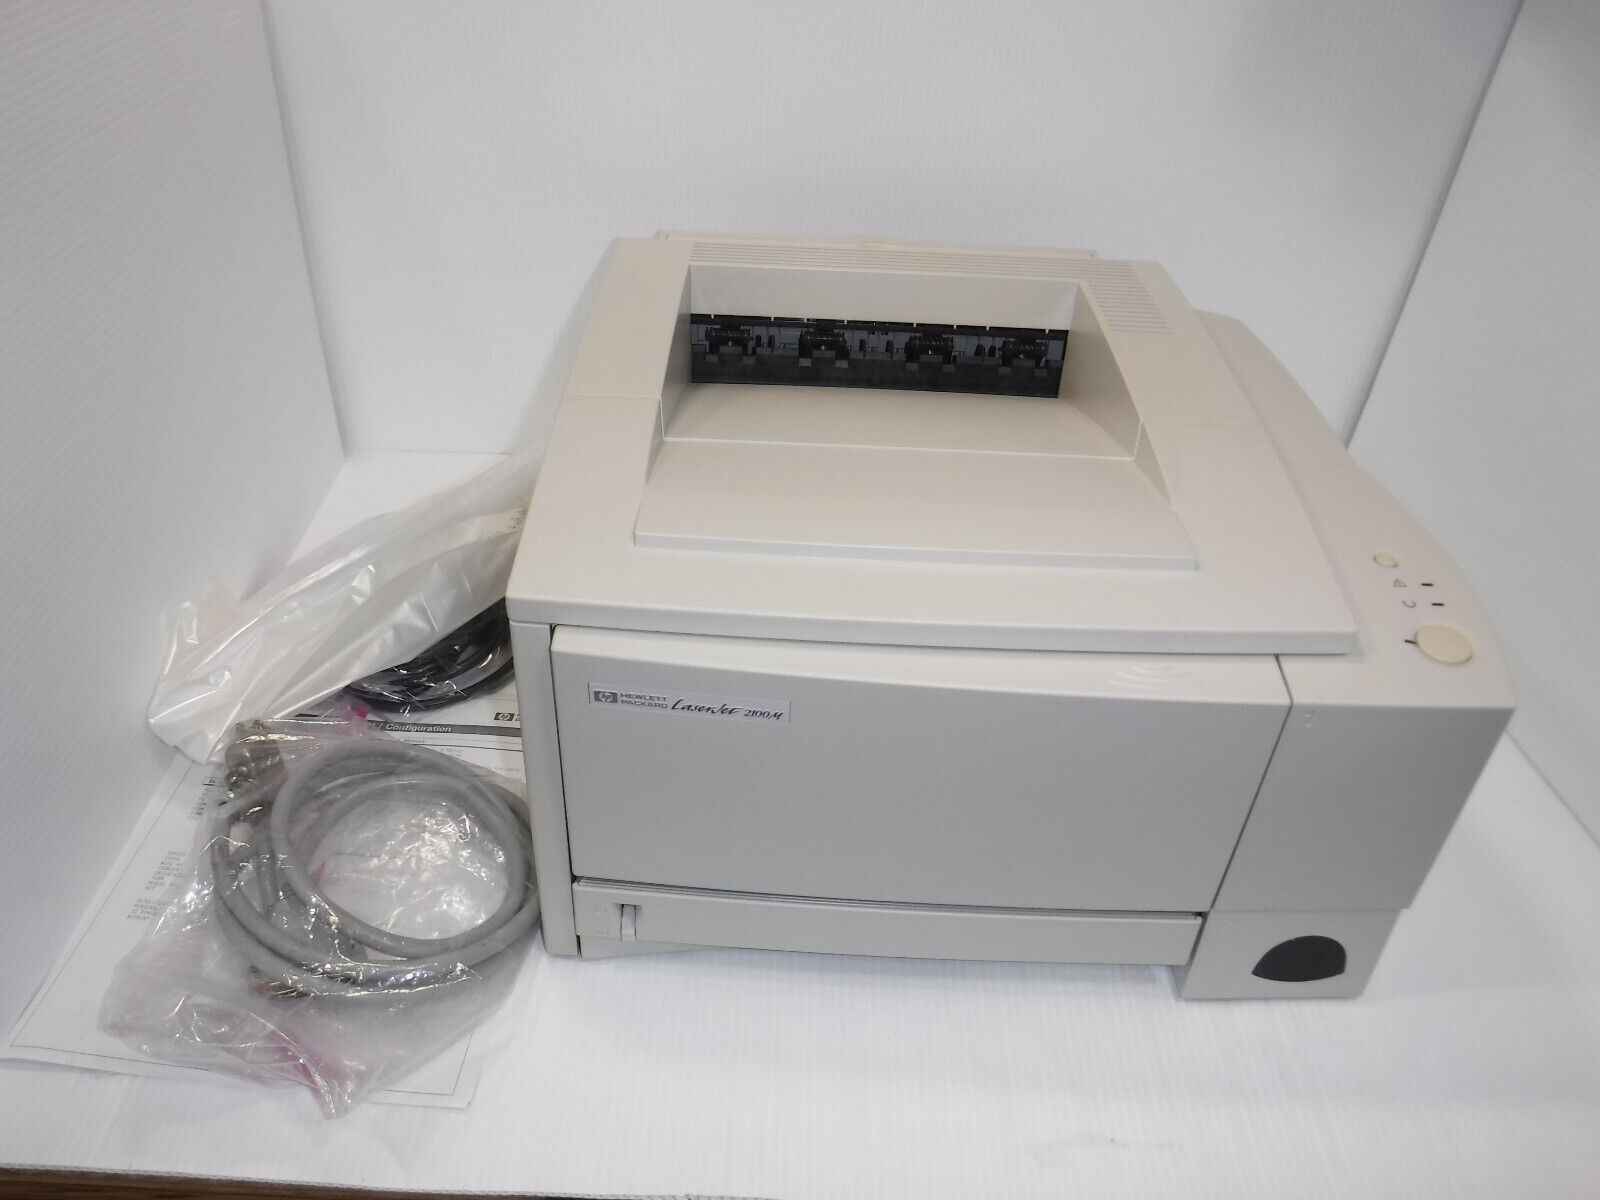 HP LaserJet 2100M Workgroup Laser Printer - WORKING; Cables Included